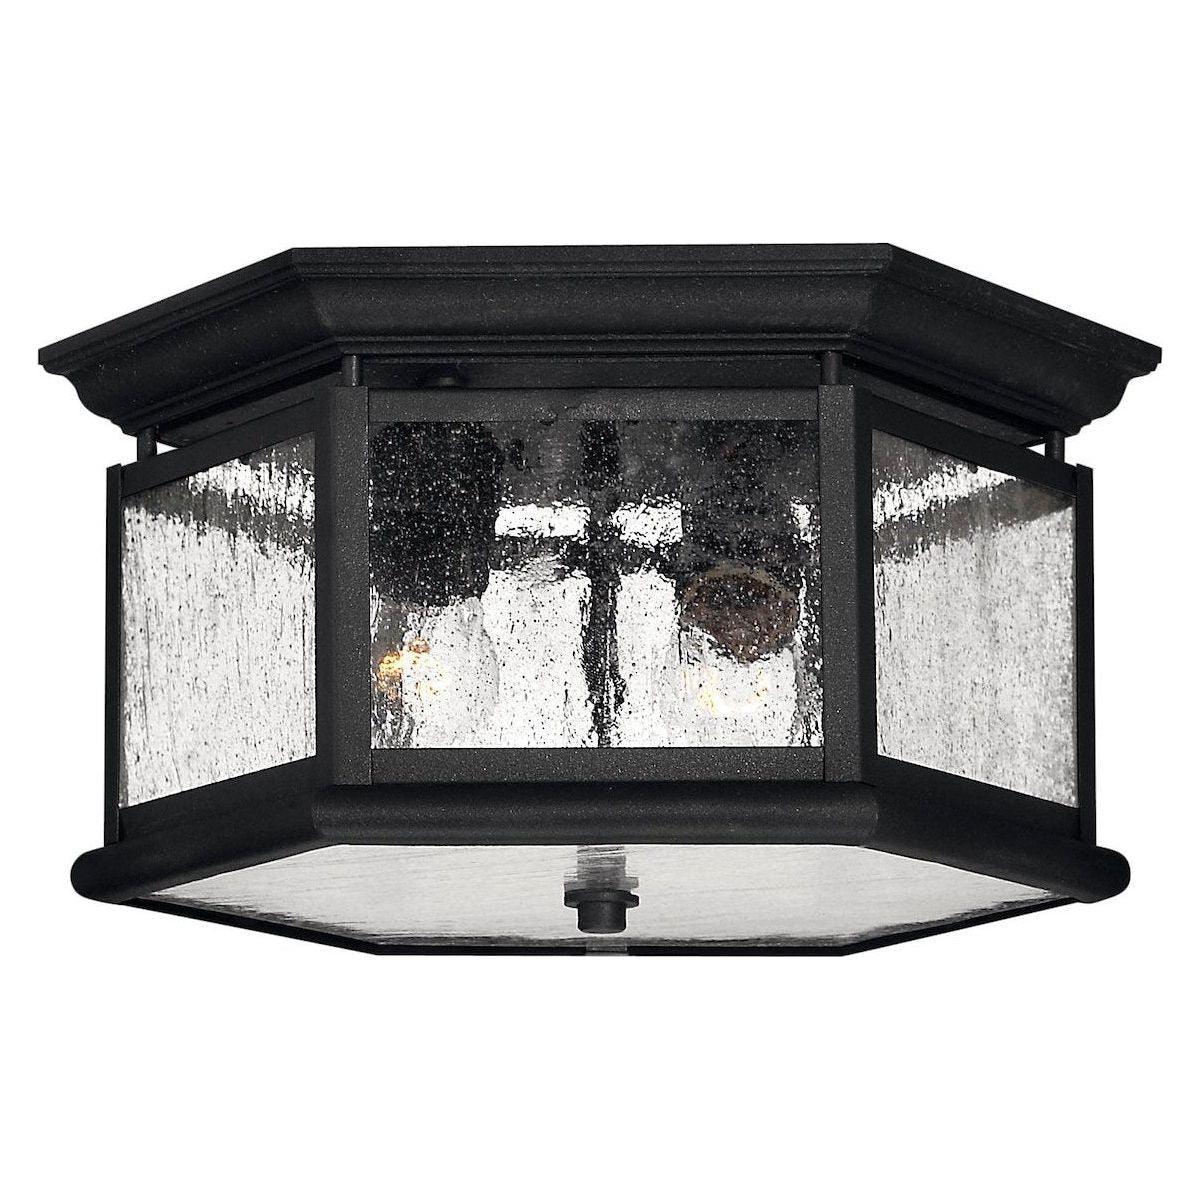 Hinkley - Edgewater Outdoor Ceiling Light - Lights Canada